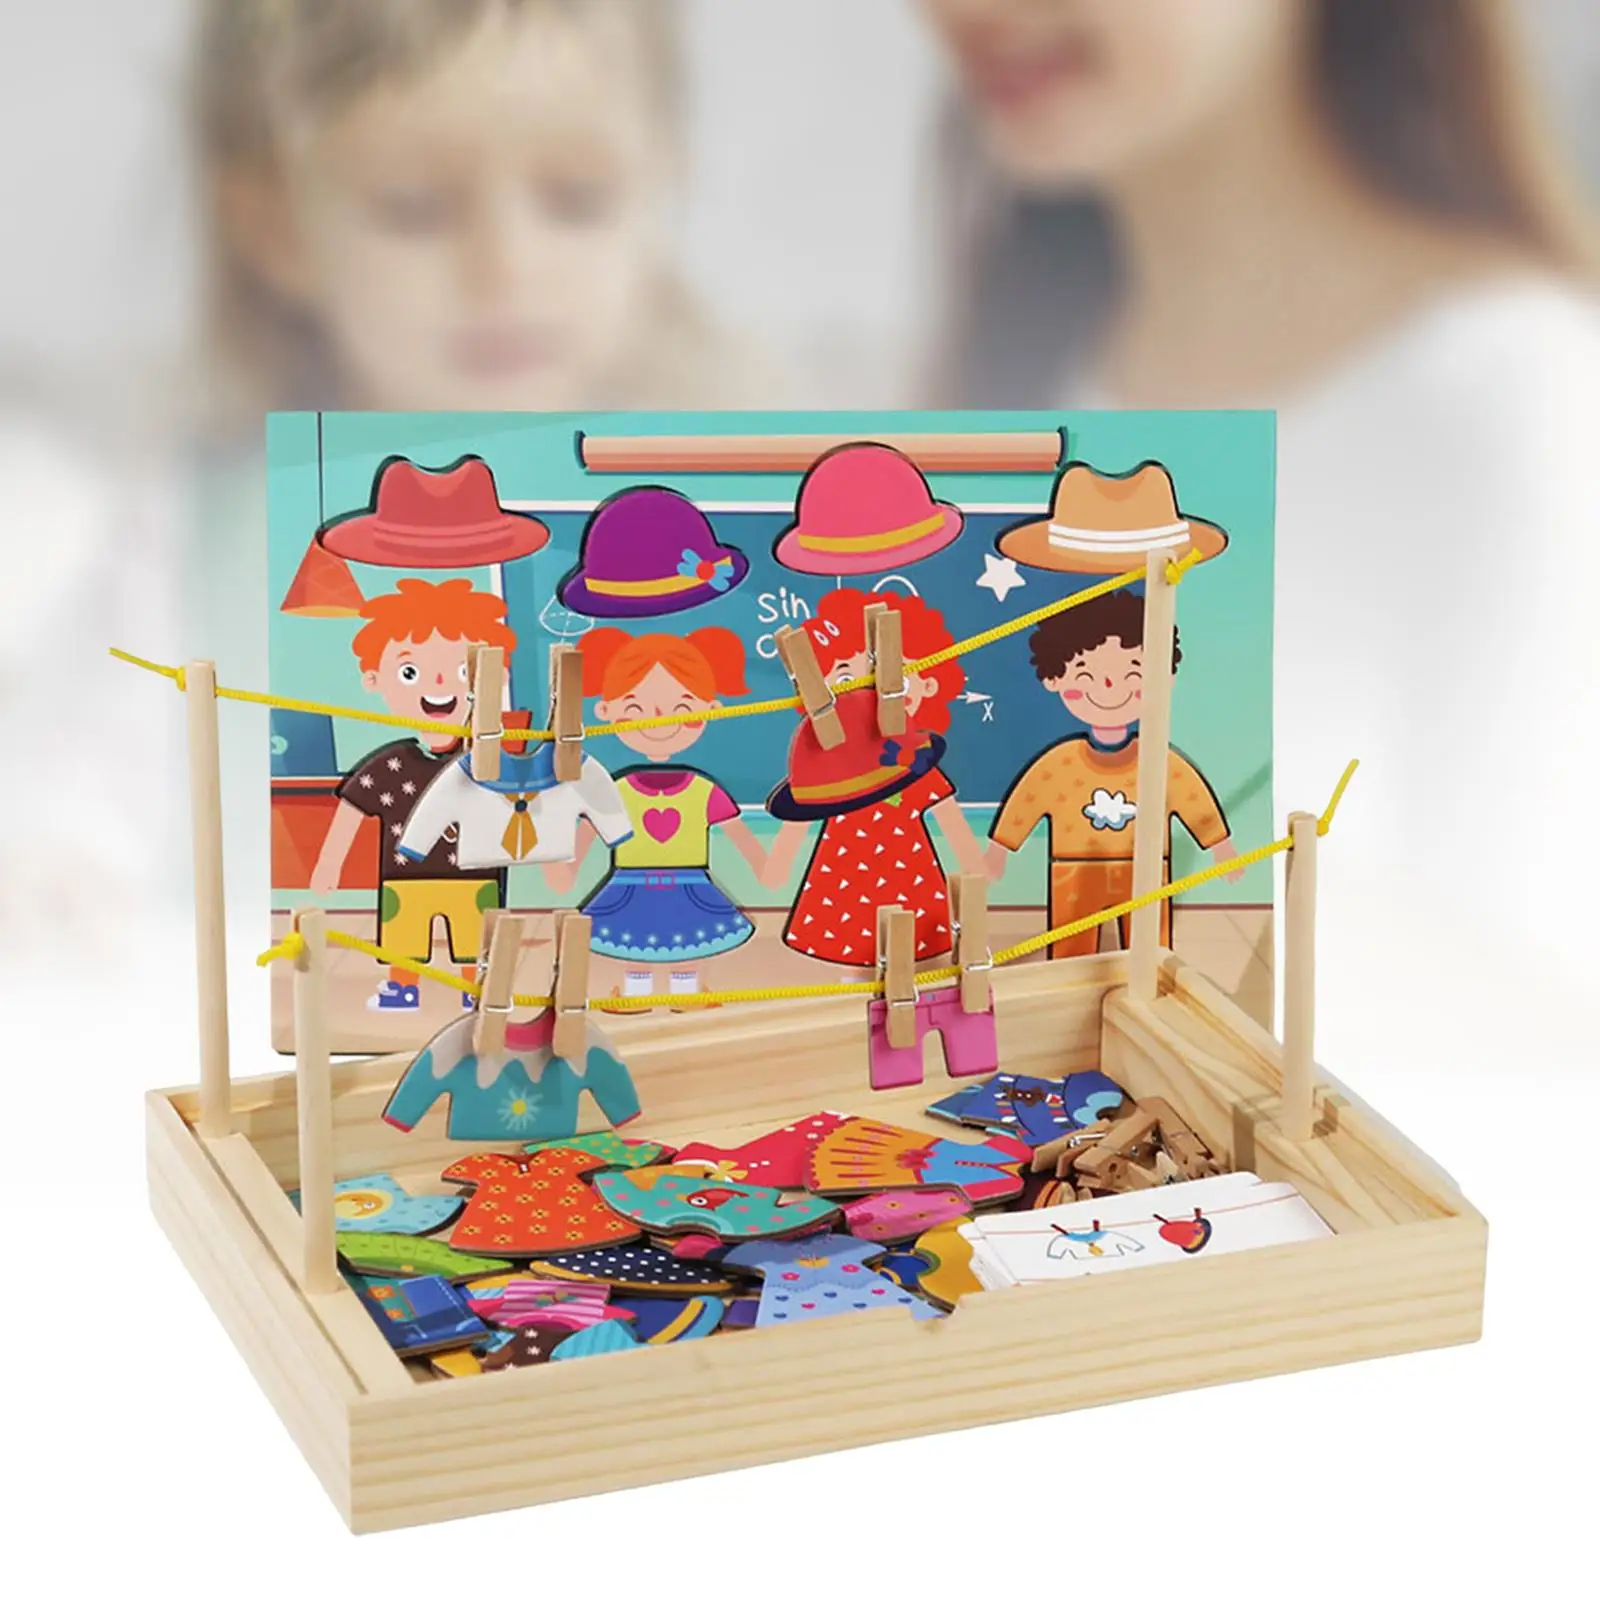 

Wooden Dress up Jigsaw Puzzles Hand Eye Coordination Role Playing Matching Sorting Toy for Ages 2 3 4 5 Kids Birthday Gift